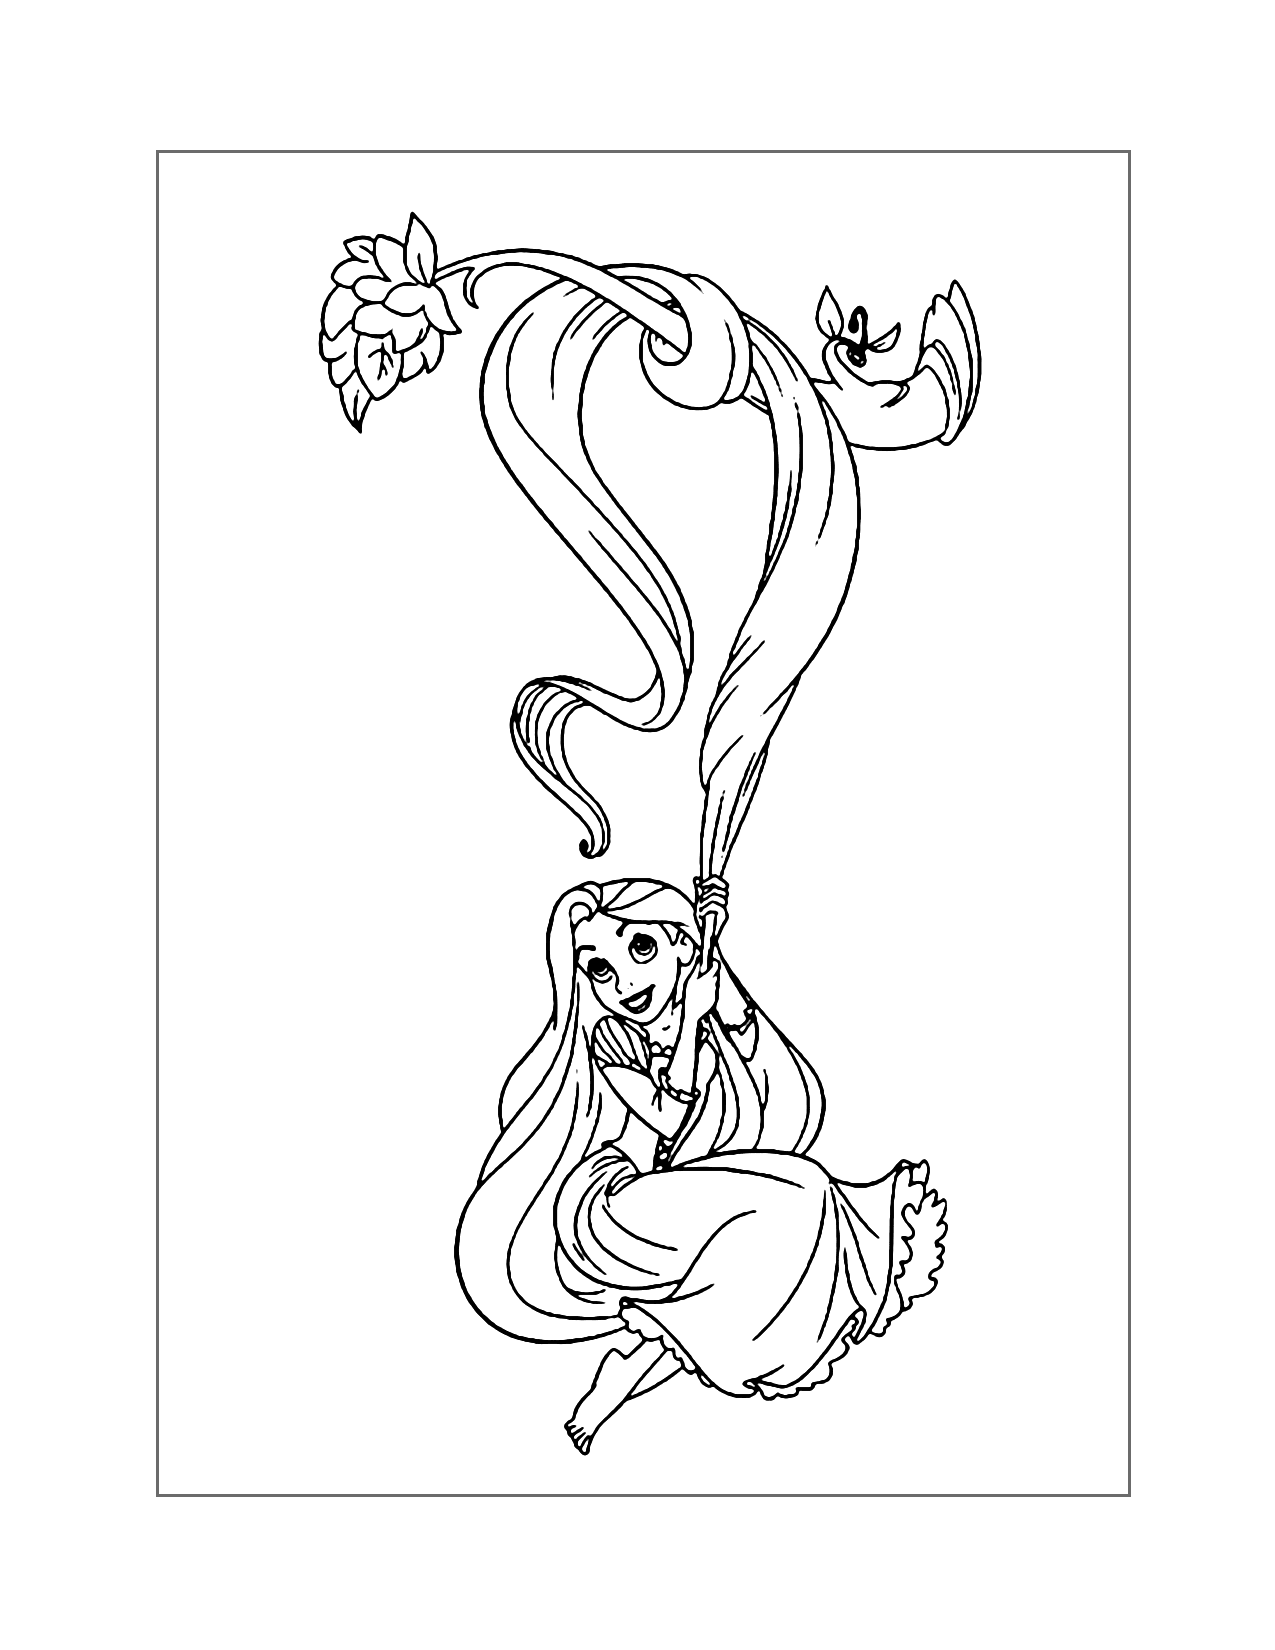 Rapunzel Swinging From Her Hair Coloring Page